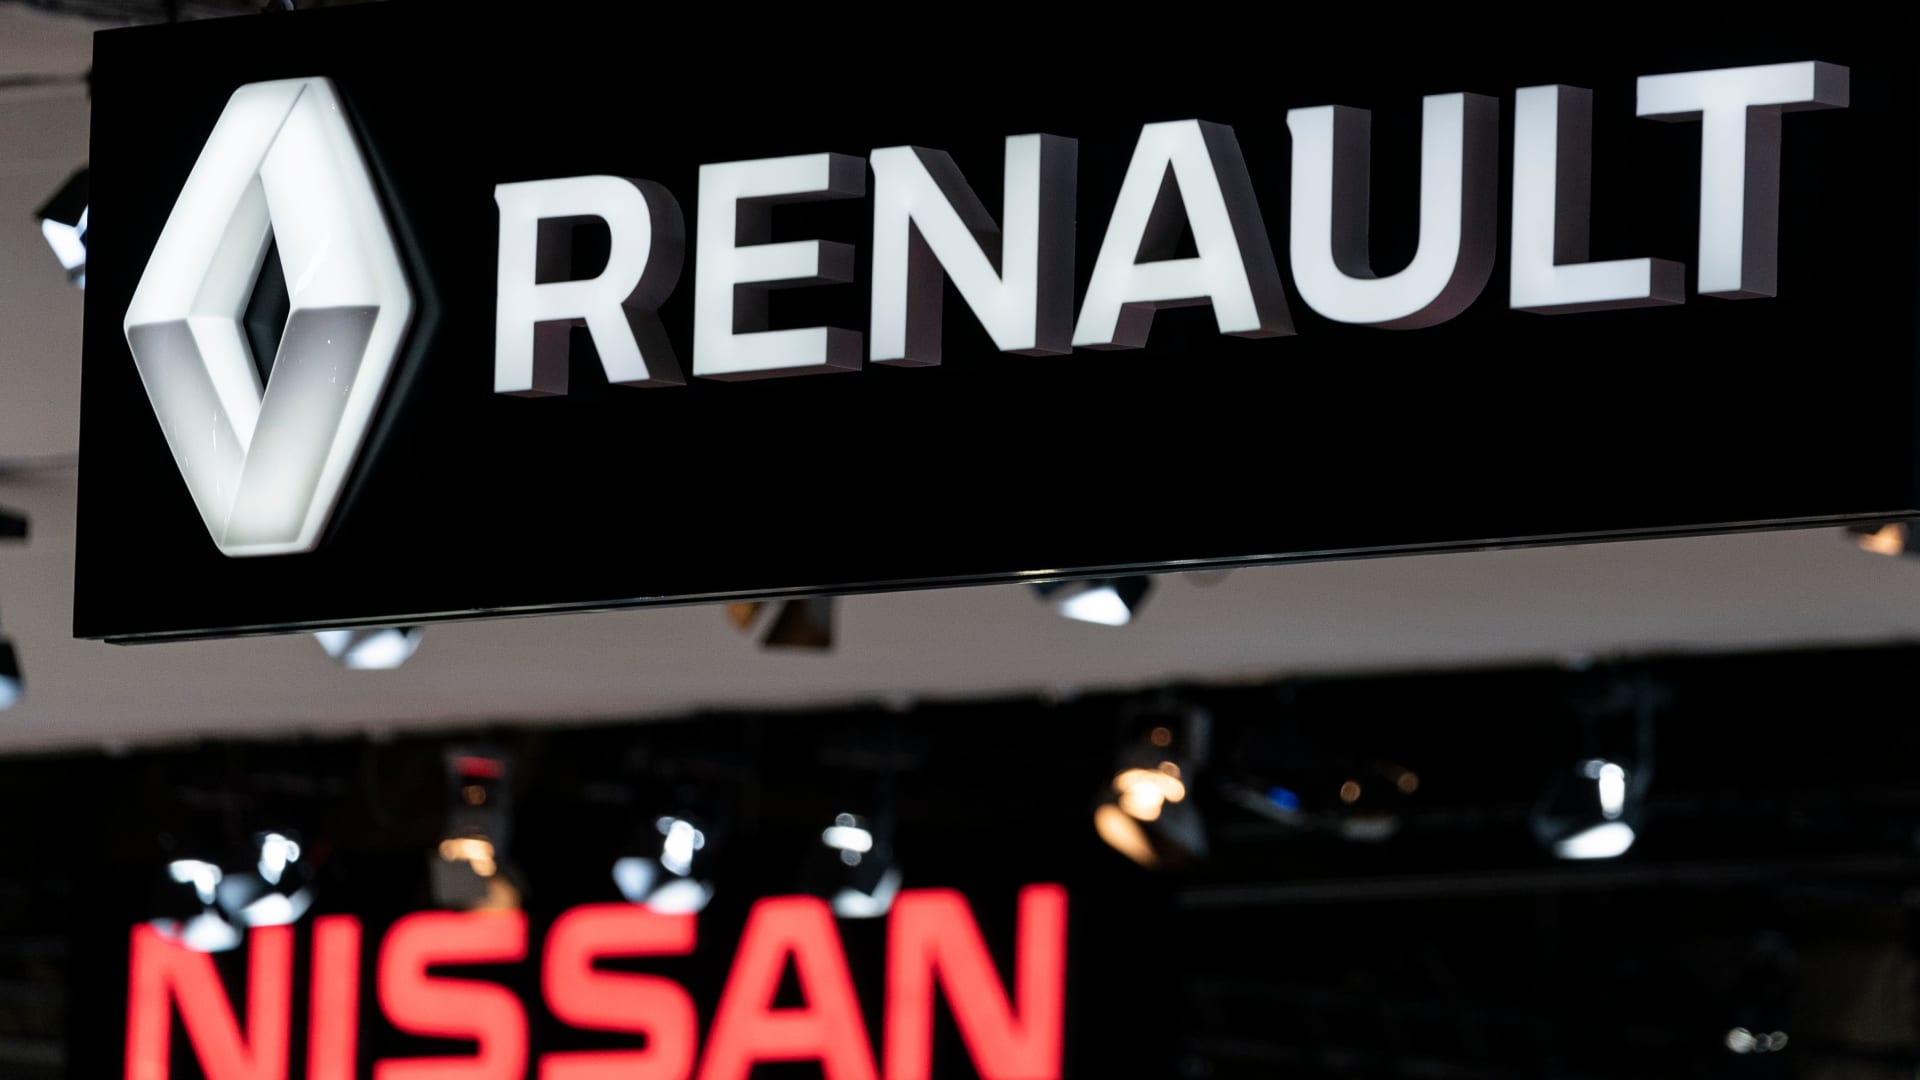 Renault slashes Nissan stake as the automakers overhaul their decades-long alliance - CNBC